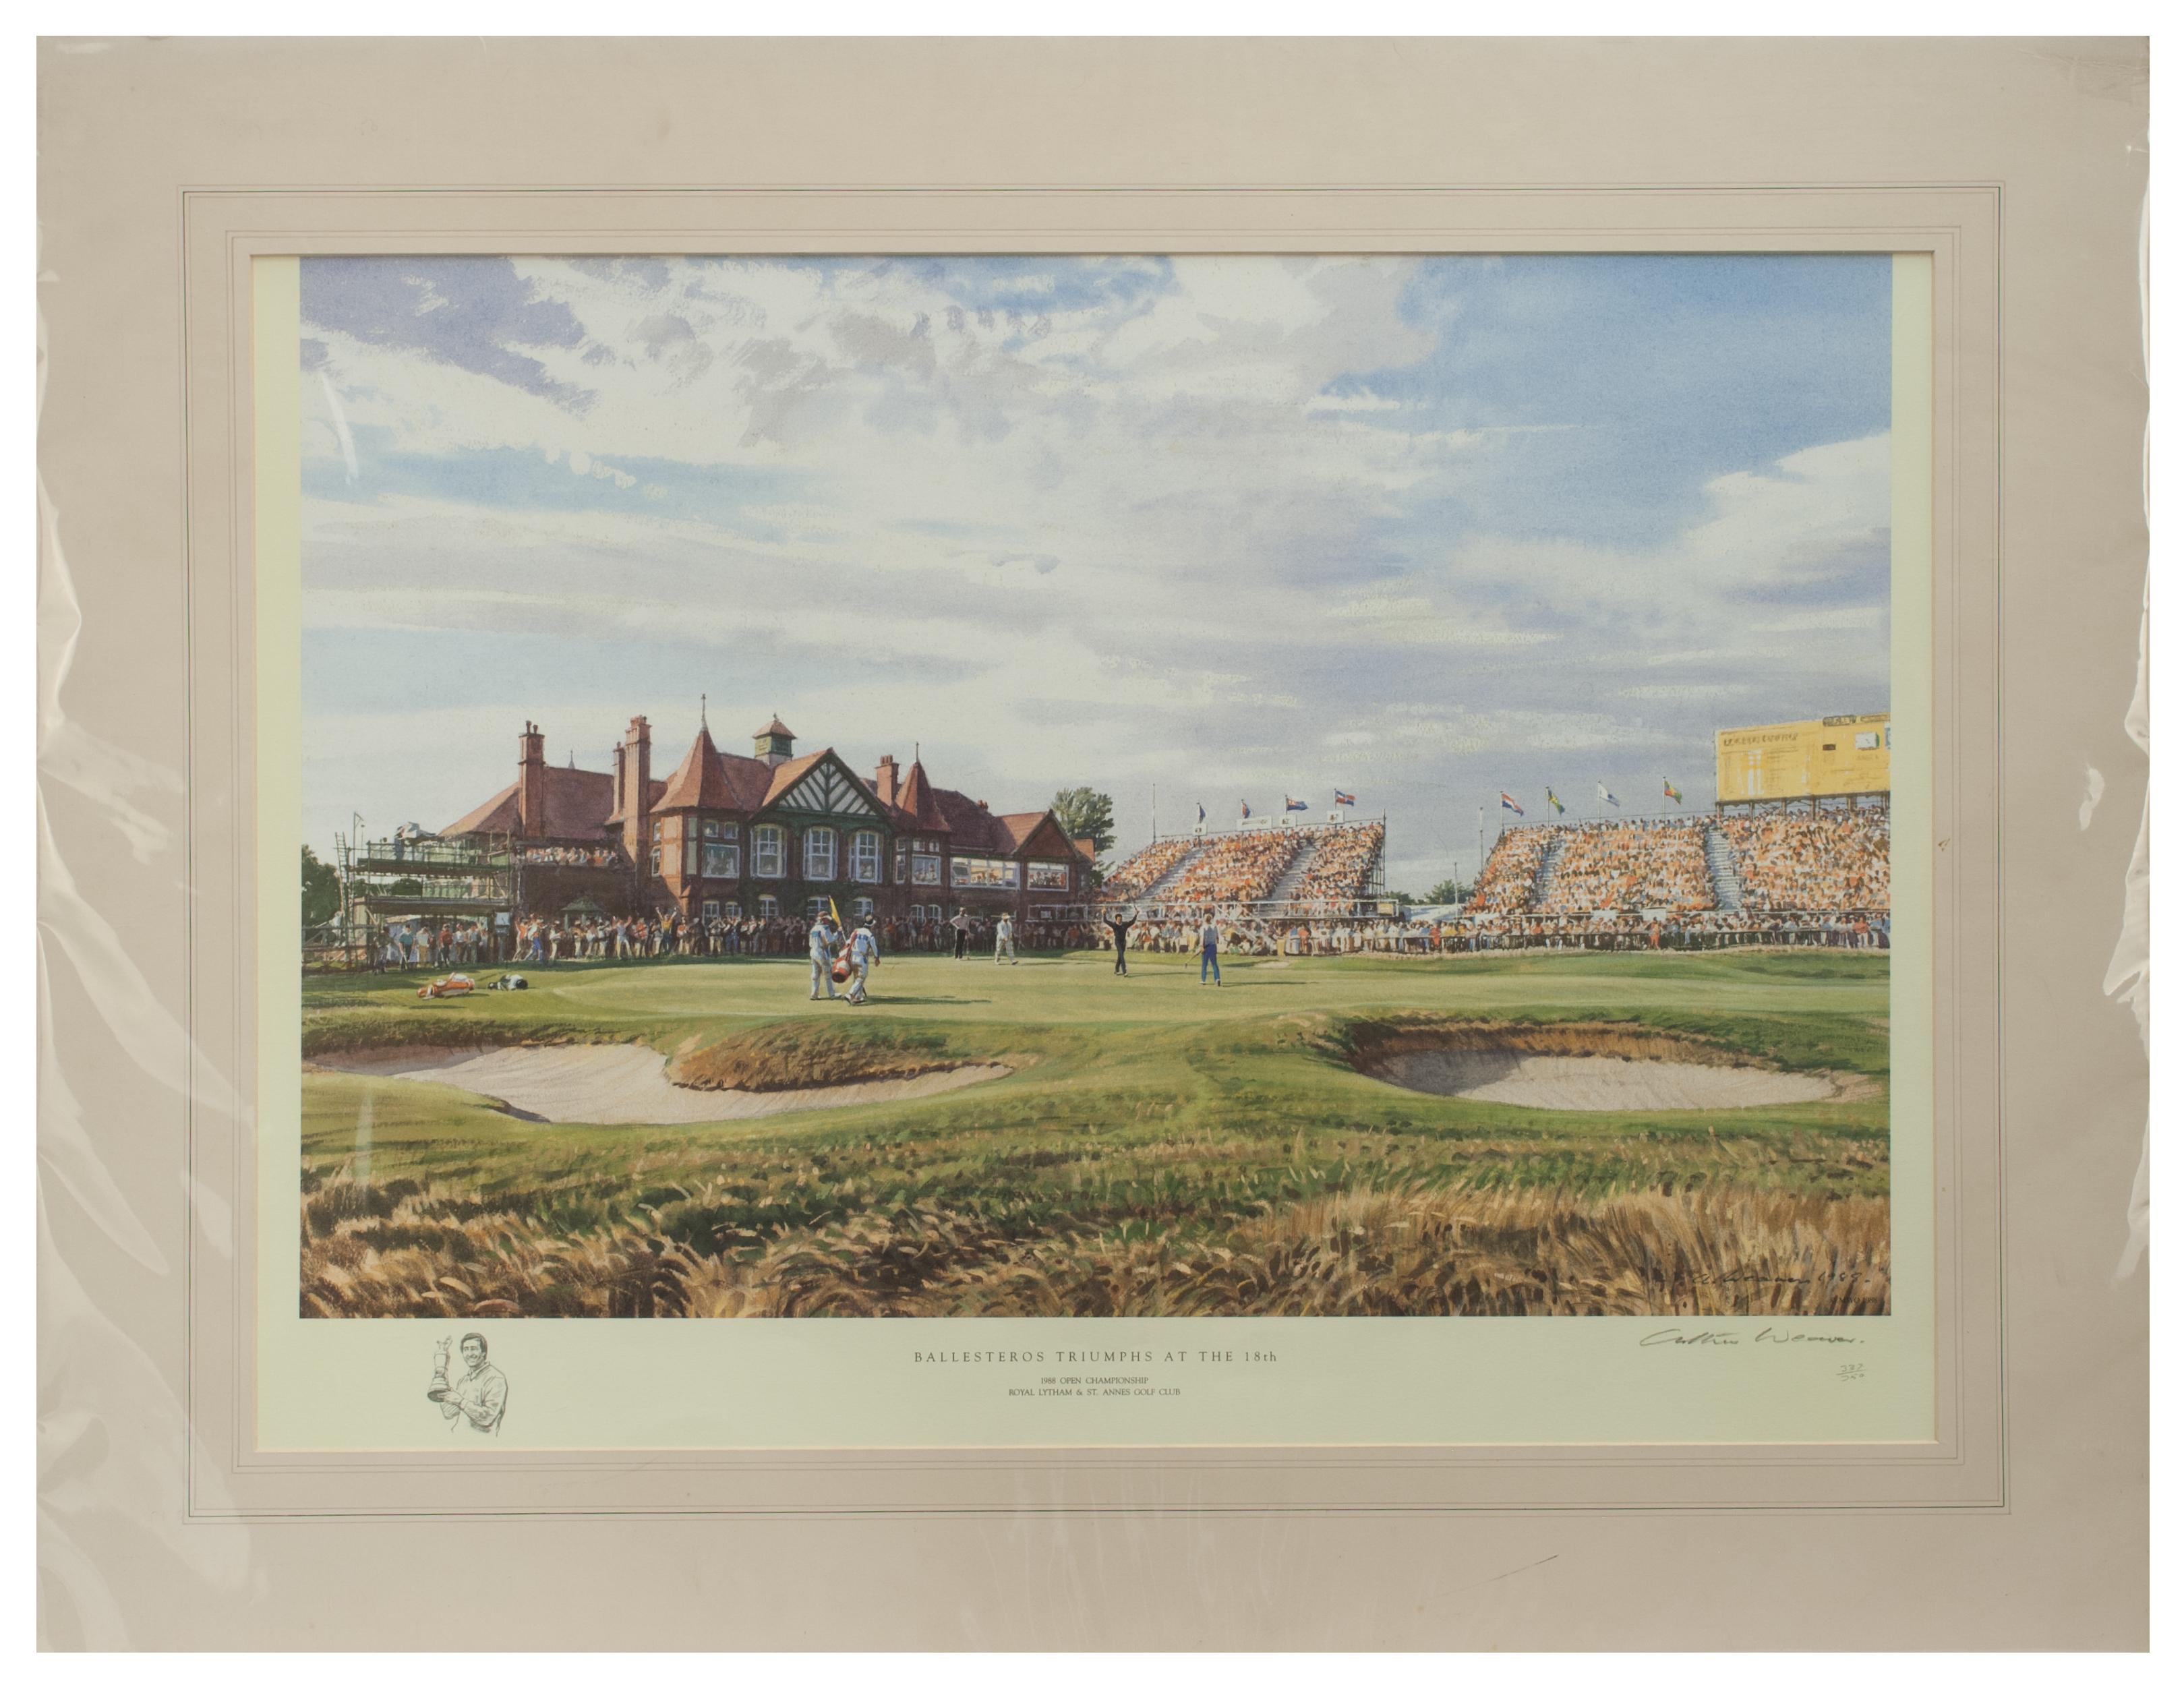 1988 open golf championship print by Arthur Weaver.
'Ballesteros triumphs at the 18th' by Arthur Weaver. A fine print of the winning moment depicting Seve Ballesteros at the 1988 Open Championship, Royal Lytham and St. Annes Golf Club. Seve